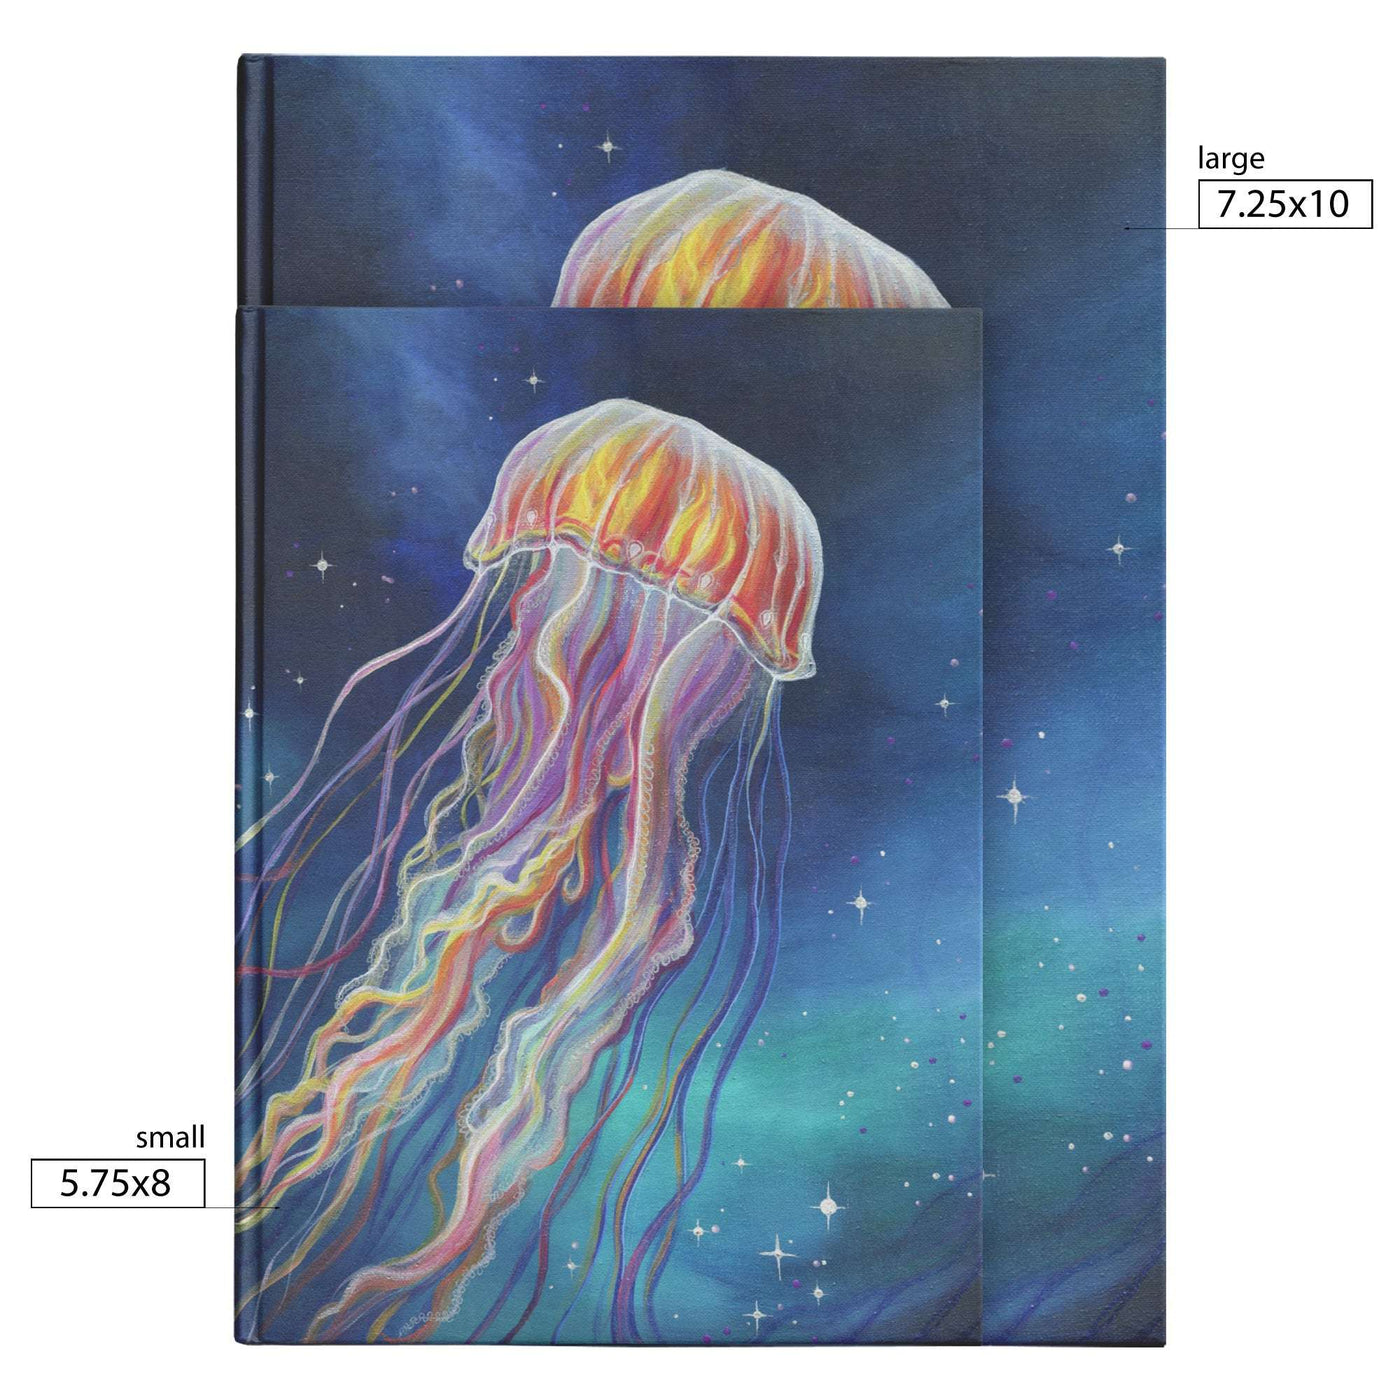 Two sizes of Jellyfish Journals featuring a colorful jellyfish illustration against a starry background; one large and one small with size dimensions provided.